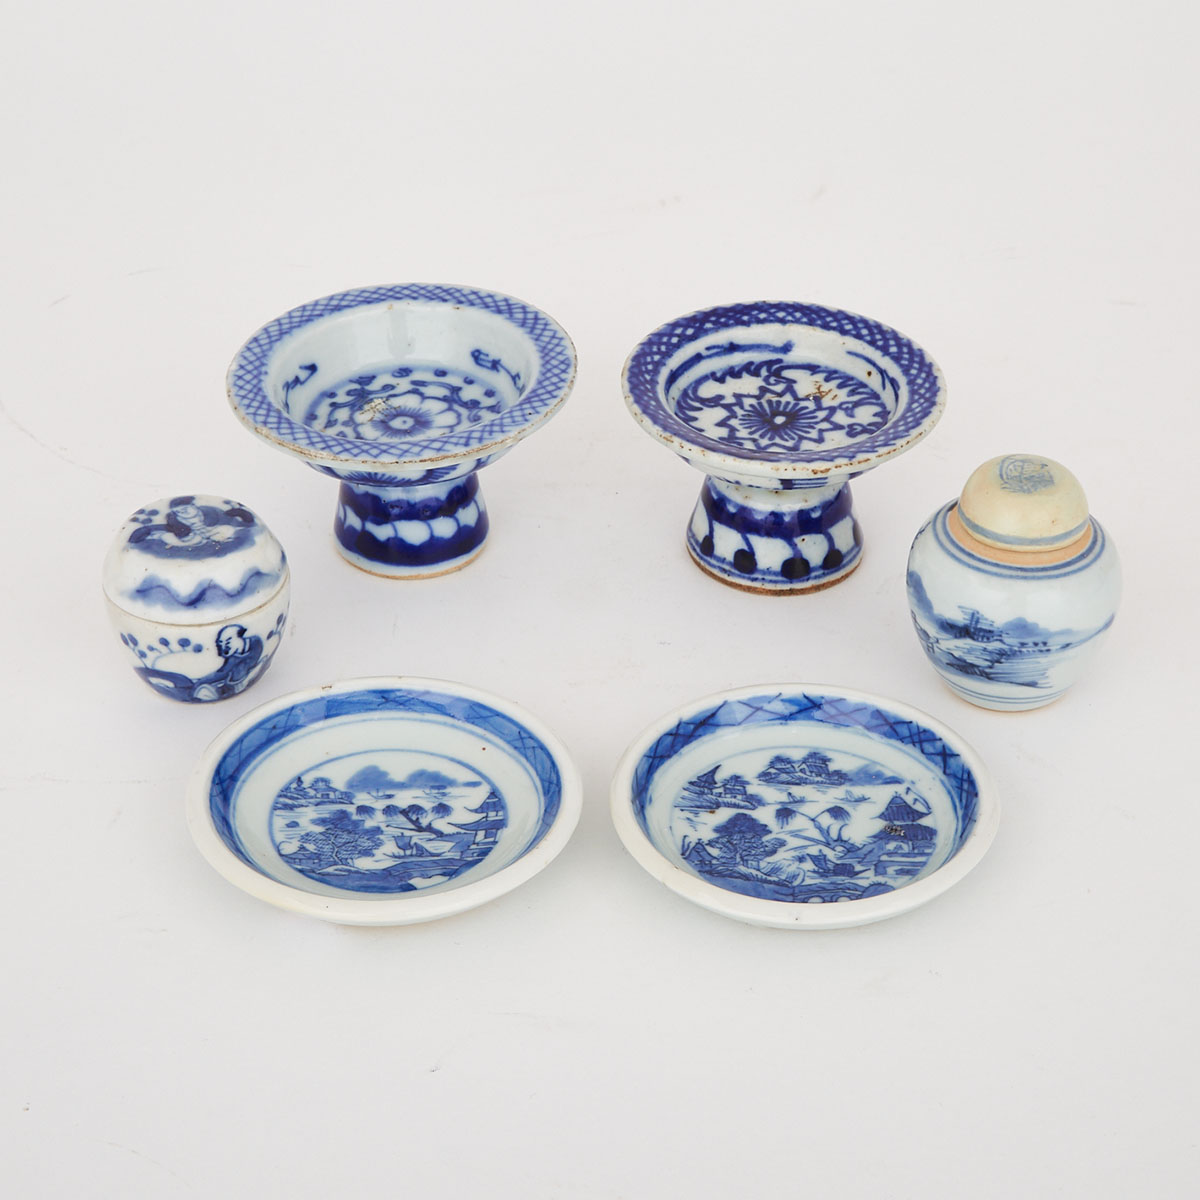 A Group of Six Miniature Blue and White Wares, 19th Century